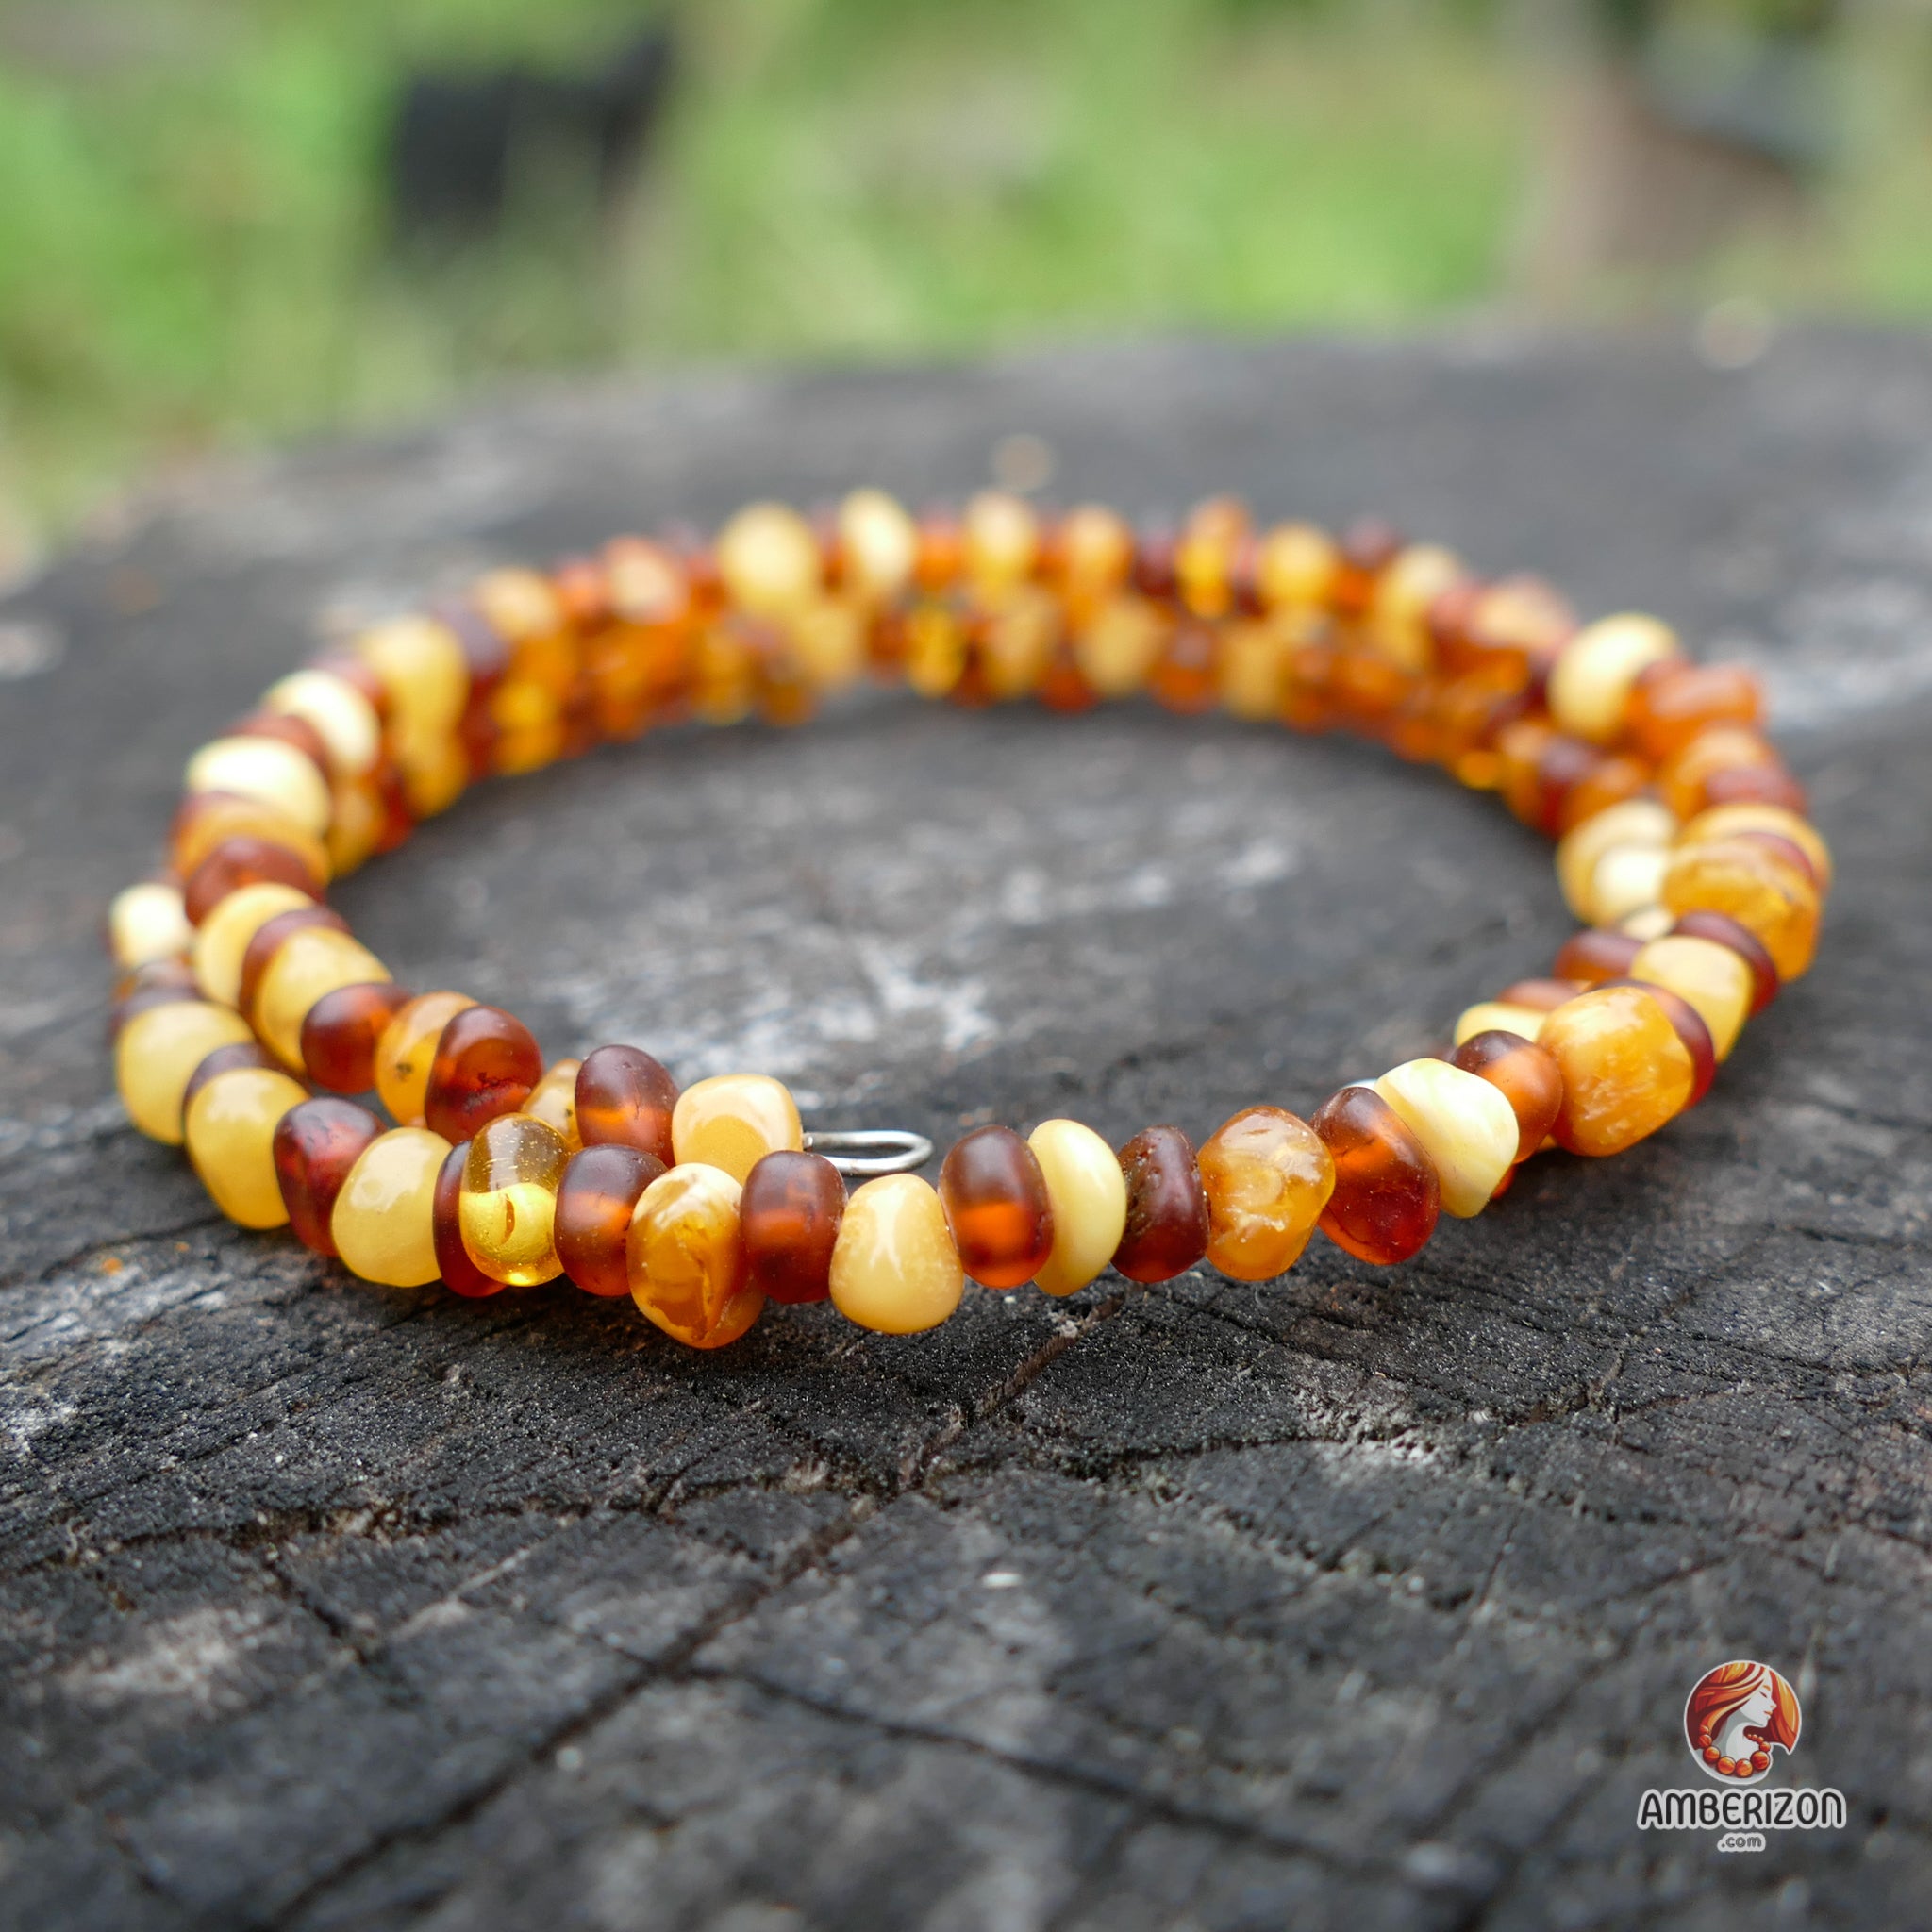 Baltic Amber Necklace and Amber Bracelet - Natural Amber from Baltic Region  (13in. and 5.5in.) (Brown) : Amazon.in: Jewellery